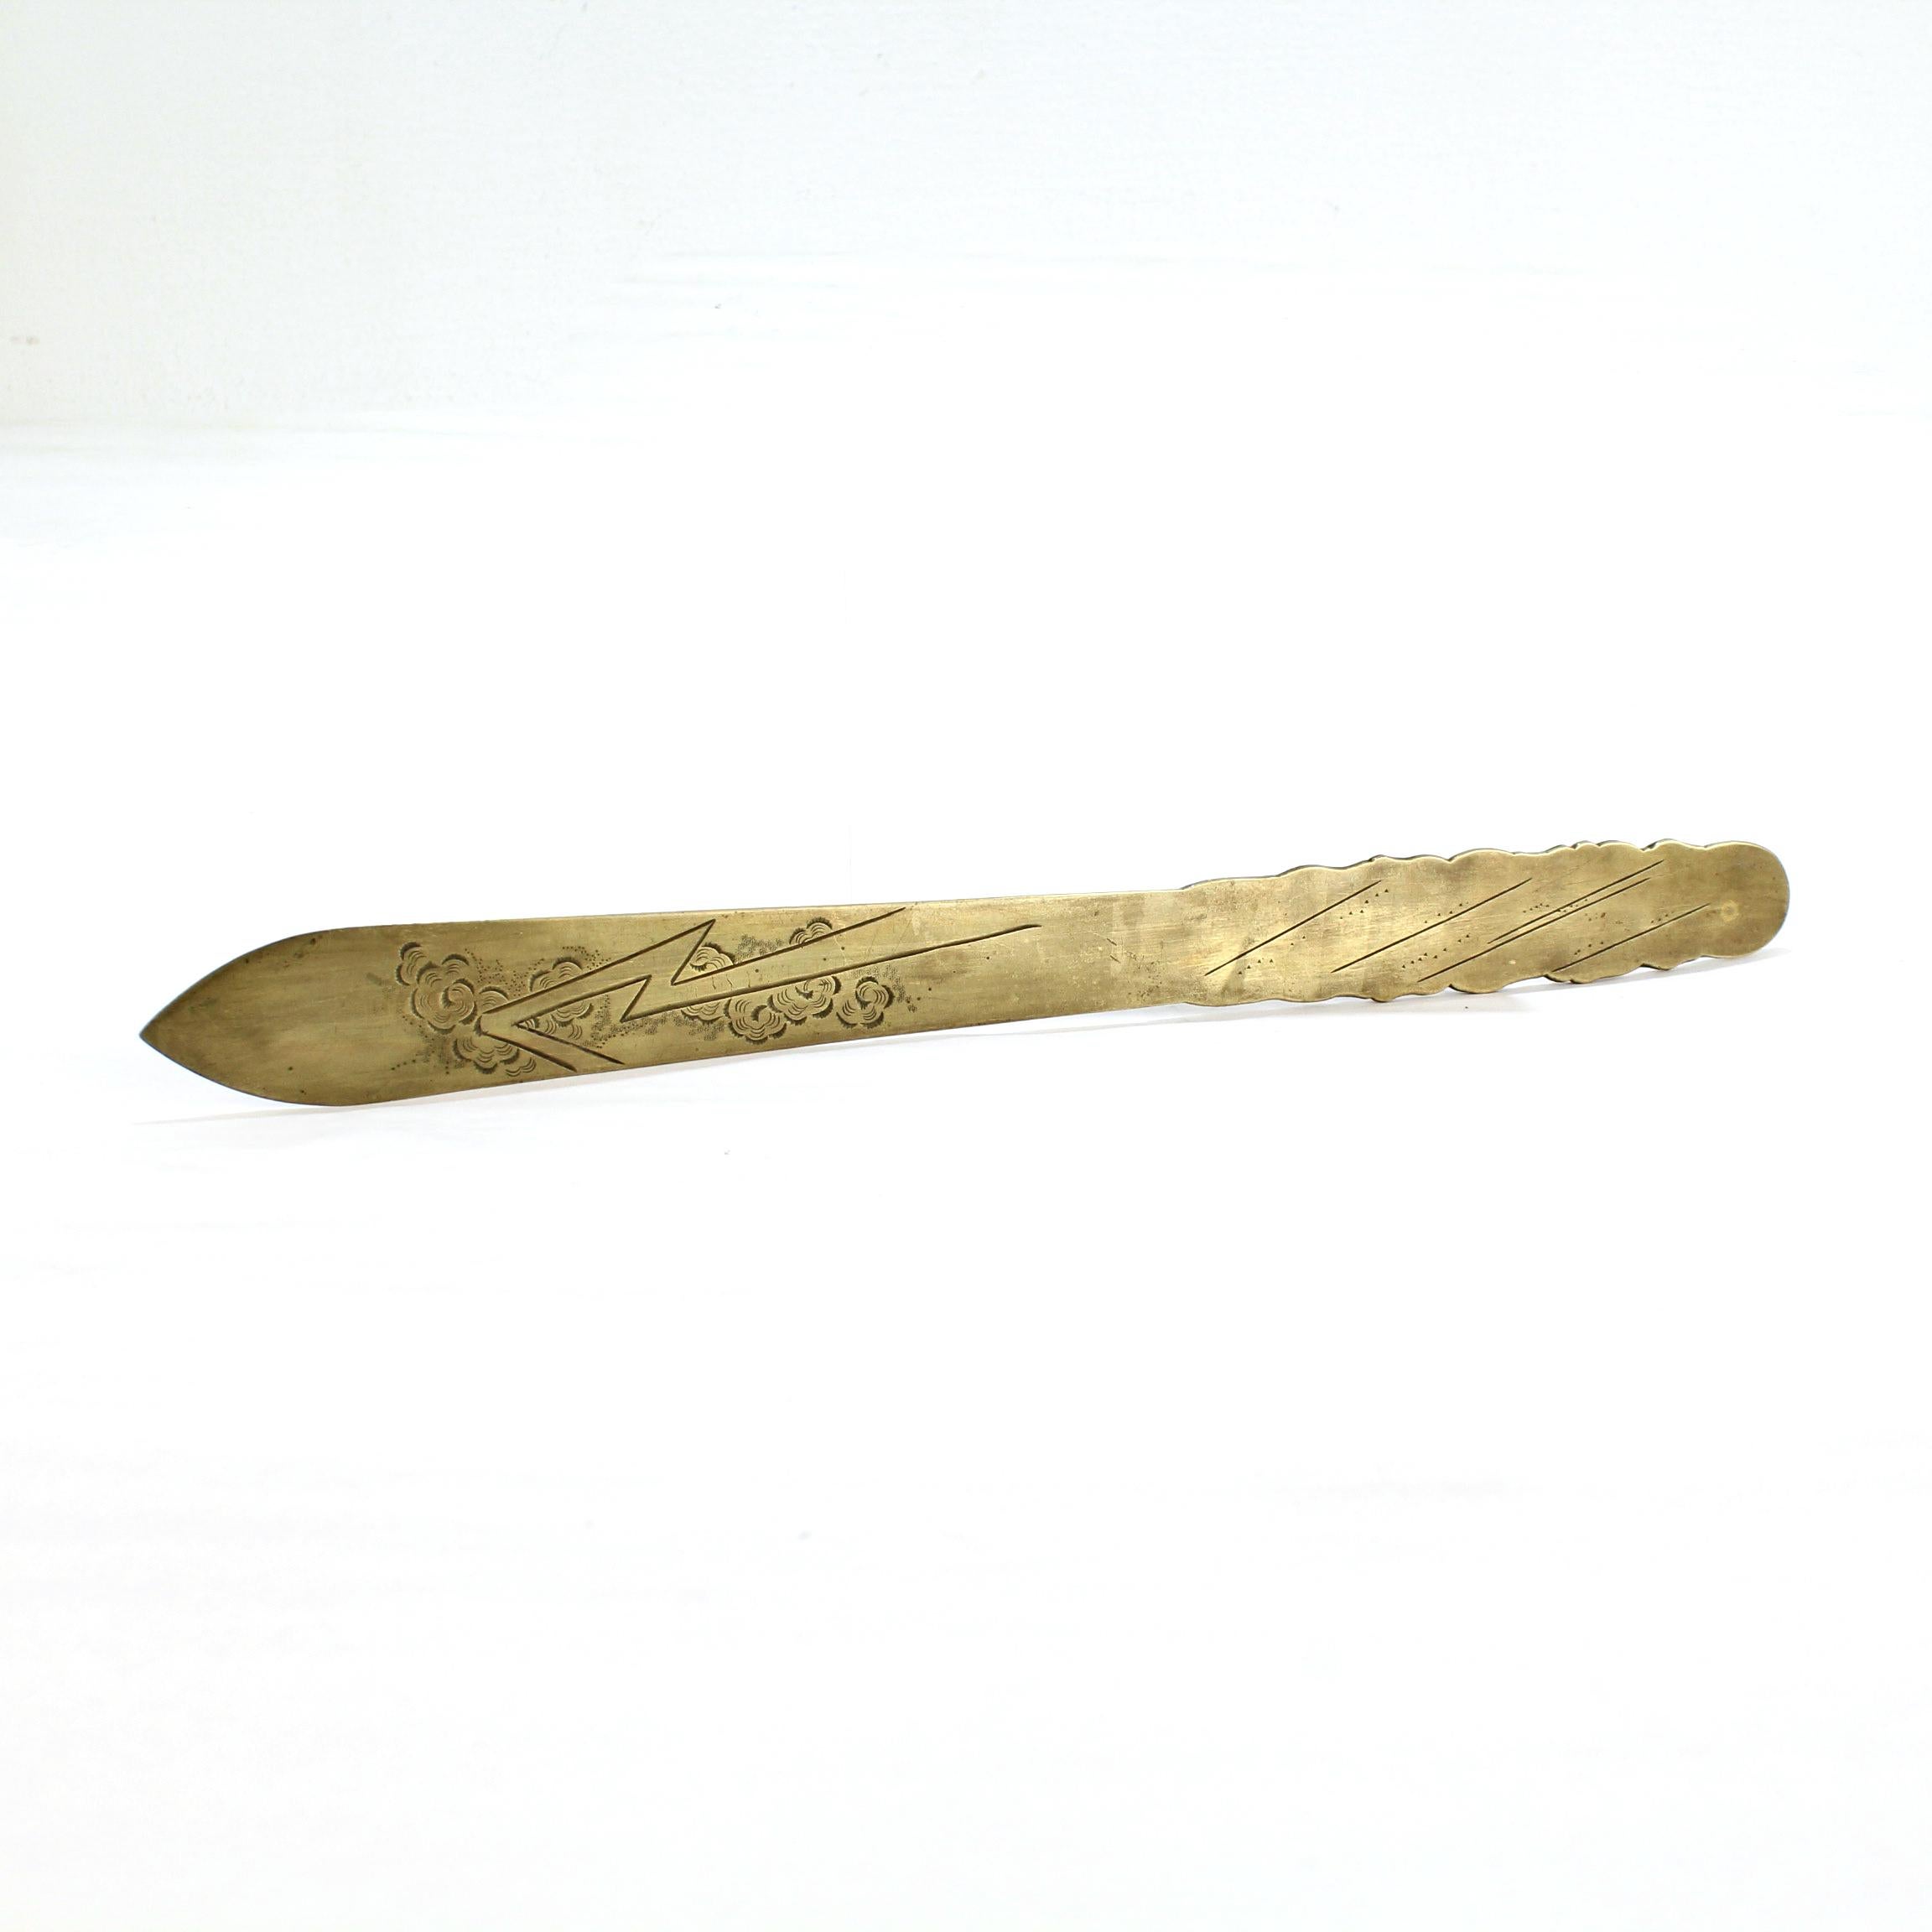 A very fine antique bronze Japanese letter opener.

The handle is decorated to the front with an embossed Eastern dragon amidst the clouds. The reverse of the handle has a simple or minimalist depiction of rain.

The blade is decorated to both